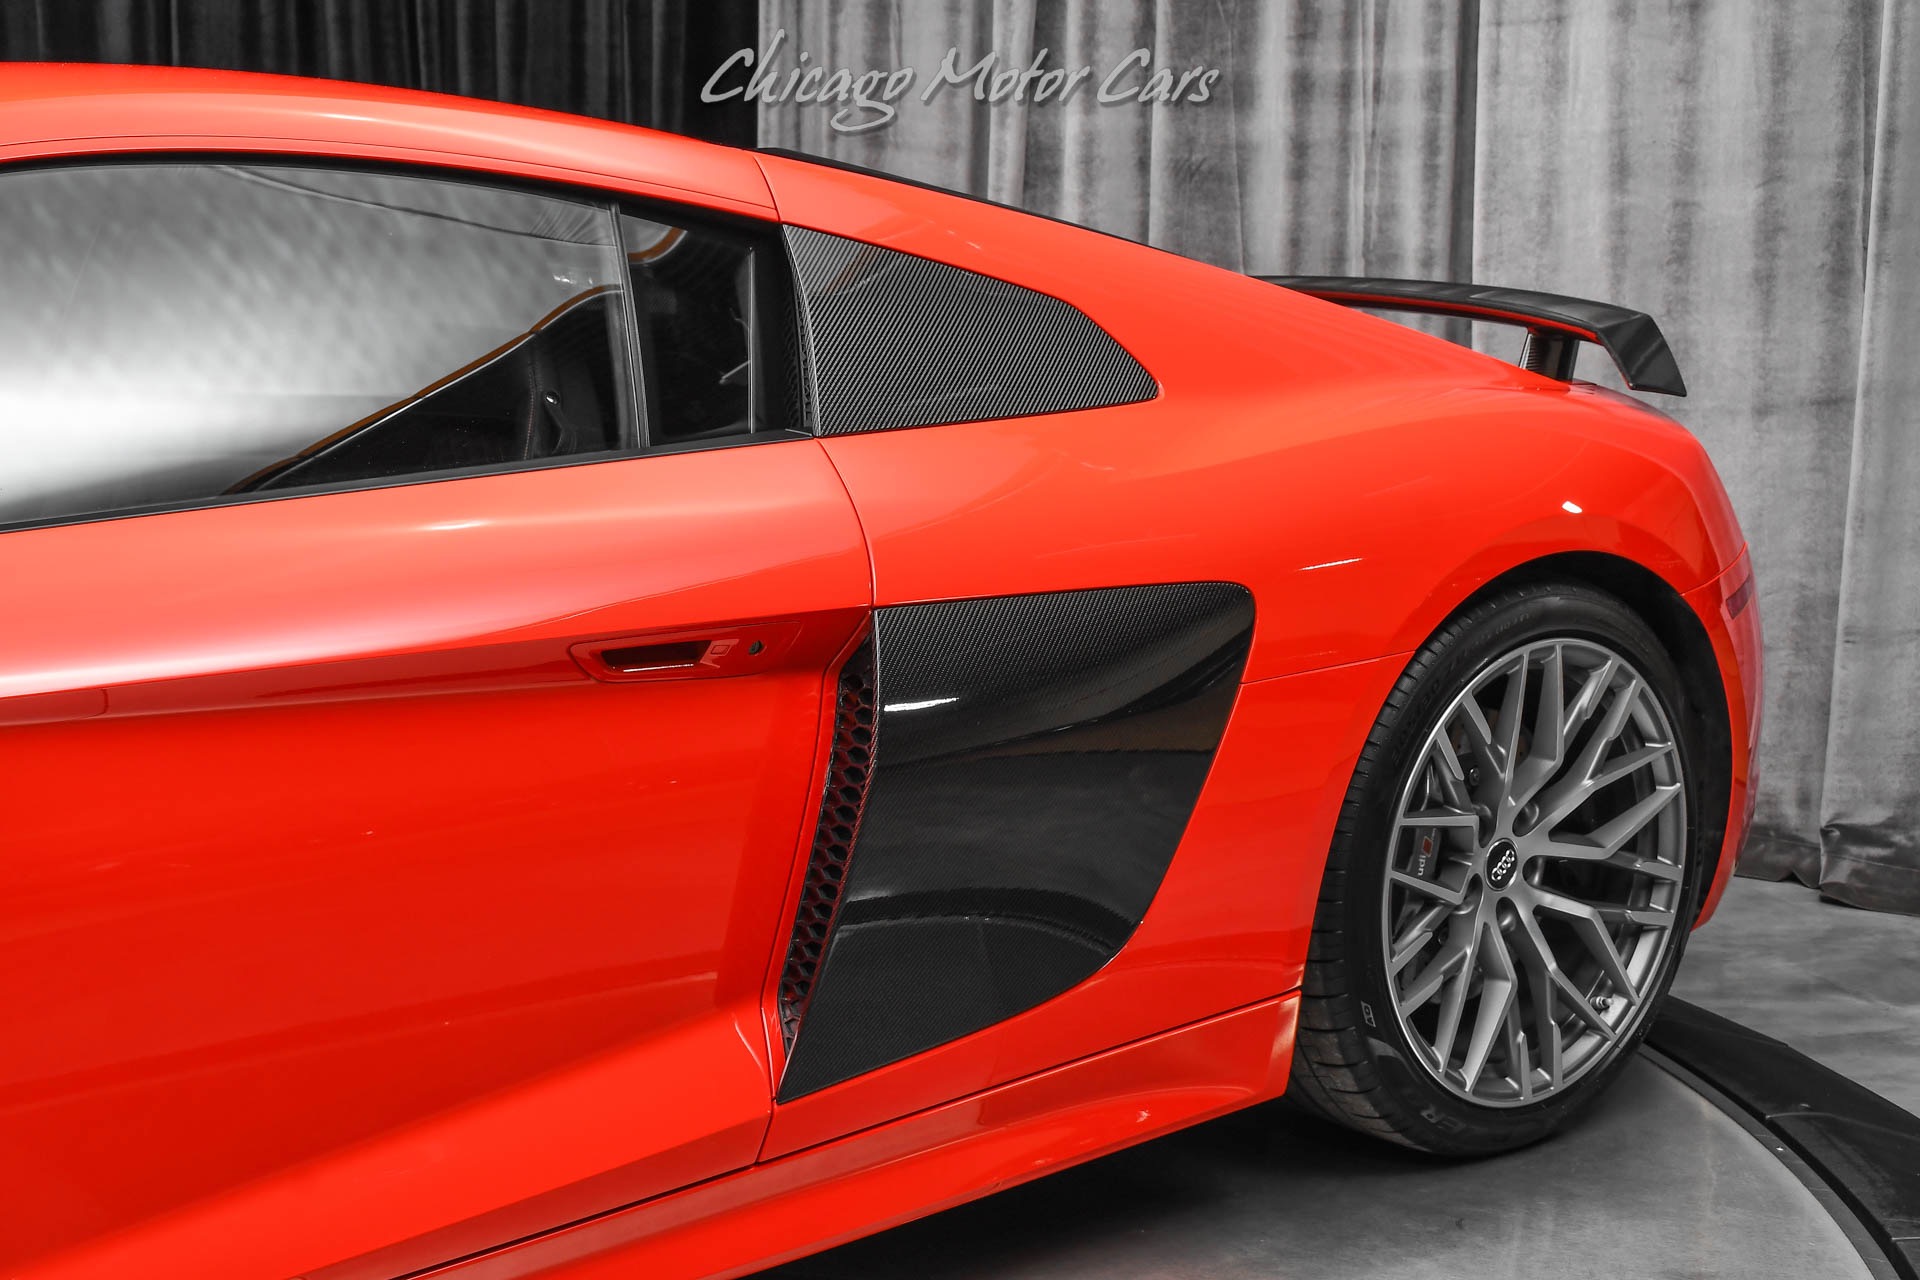 Used-2017-Audi-R8-52-quattro-V10-Plus-Coupe-LOW-Miles-RARE-Dynamite-Red-Carbon-LOADED